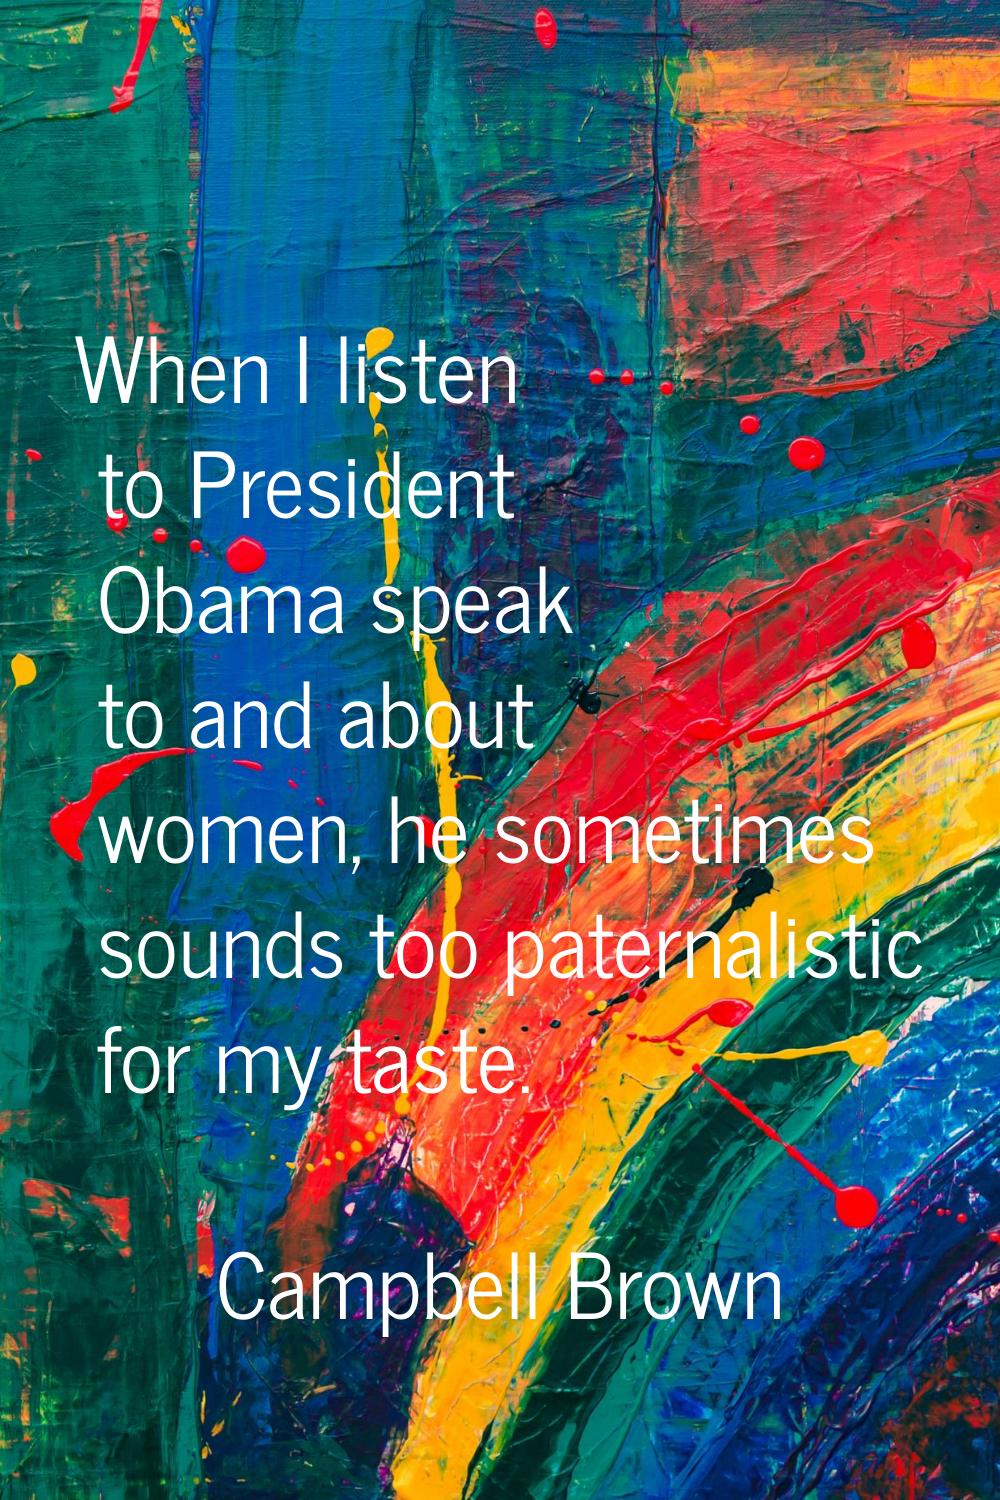 When I listen to President Obama speak to and about women, he sometimes sounds too paternalistic fo